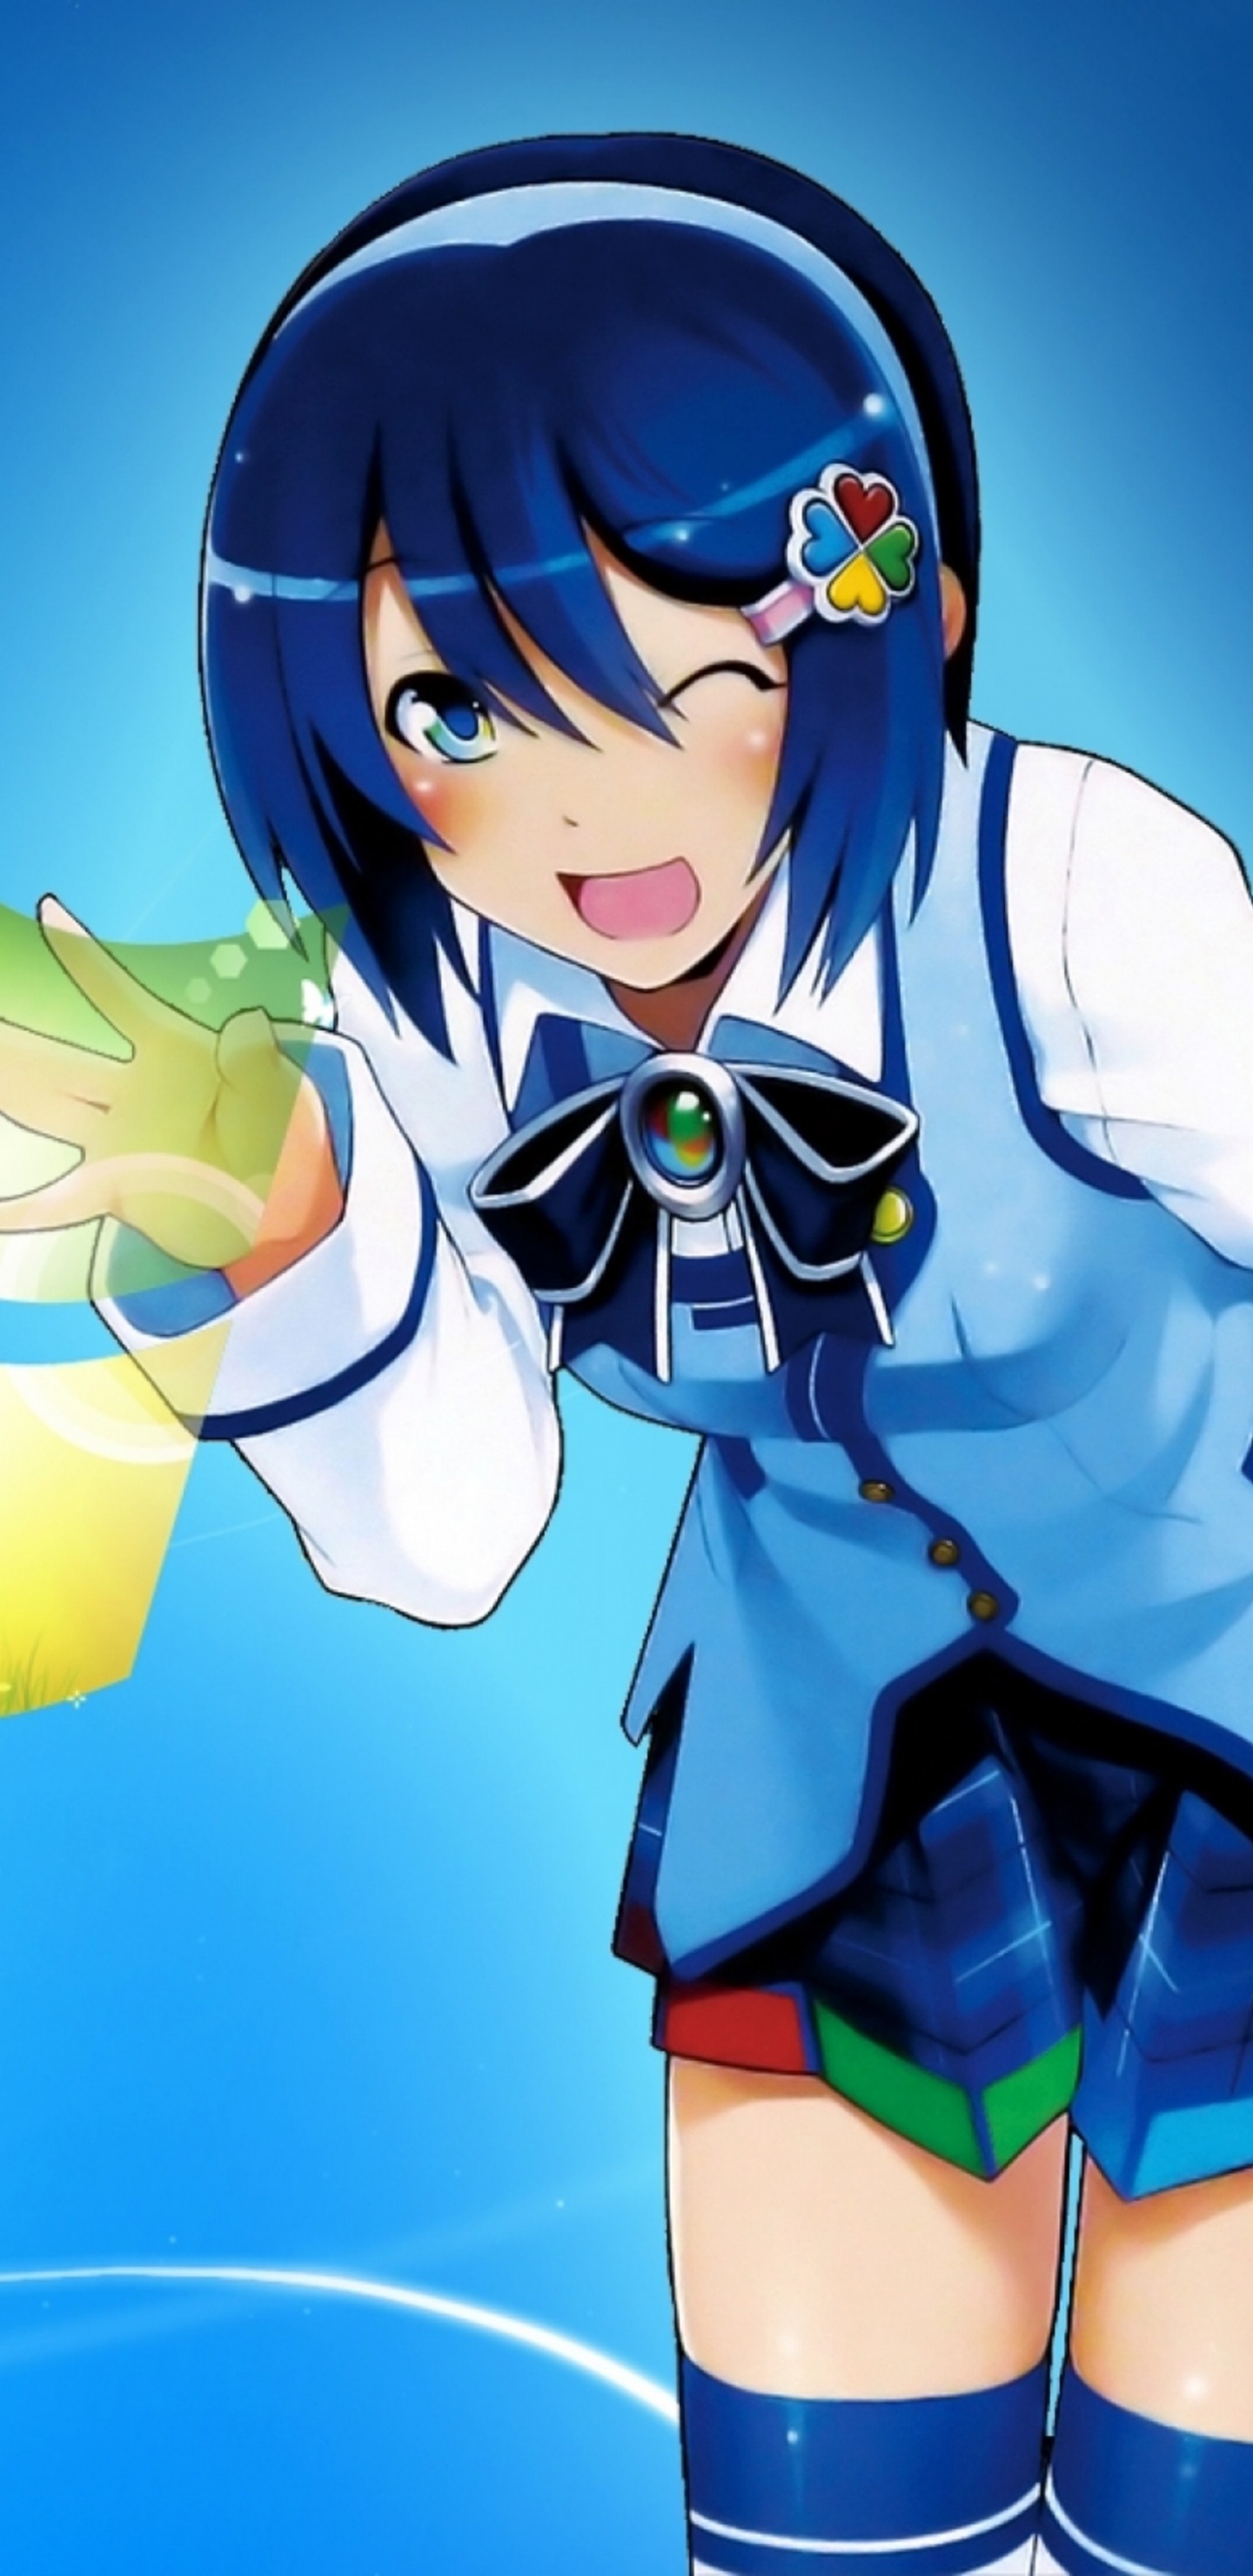 Woman in Blue and White School Uniform Anime Character. Wallpaper in 1440x2960 Resolution